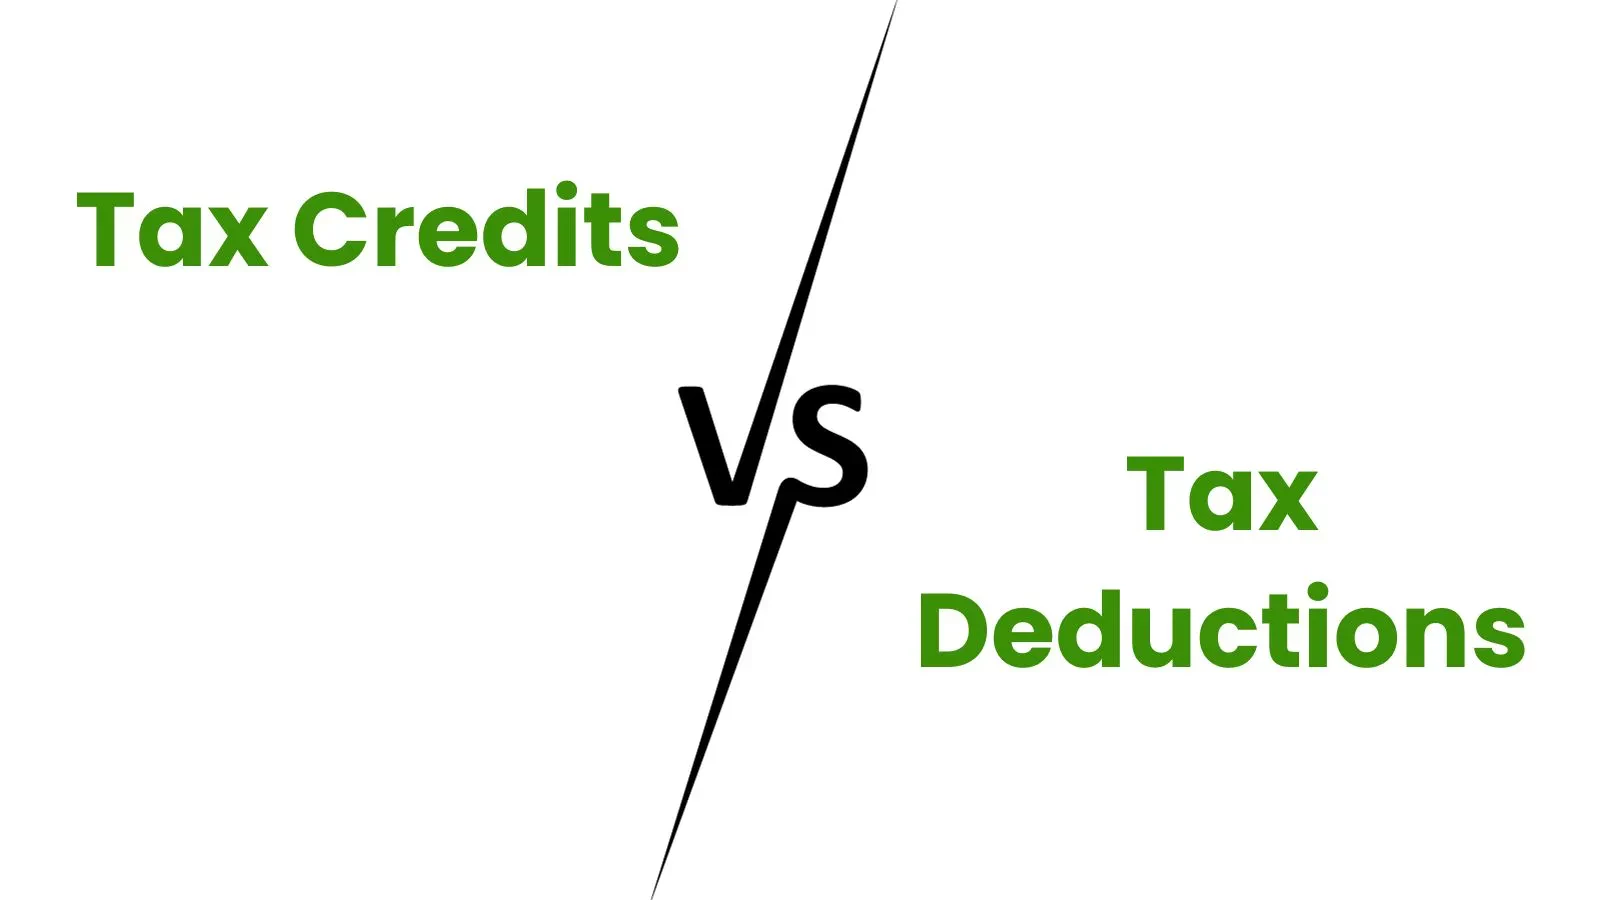 What's the difference between tax credit and tax deduction?